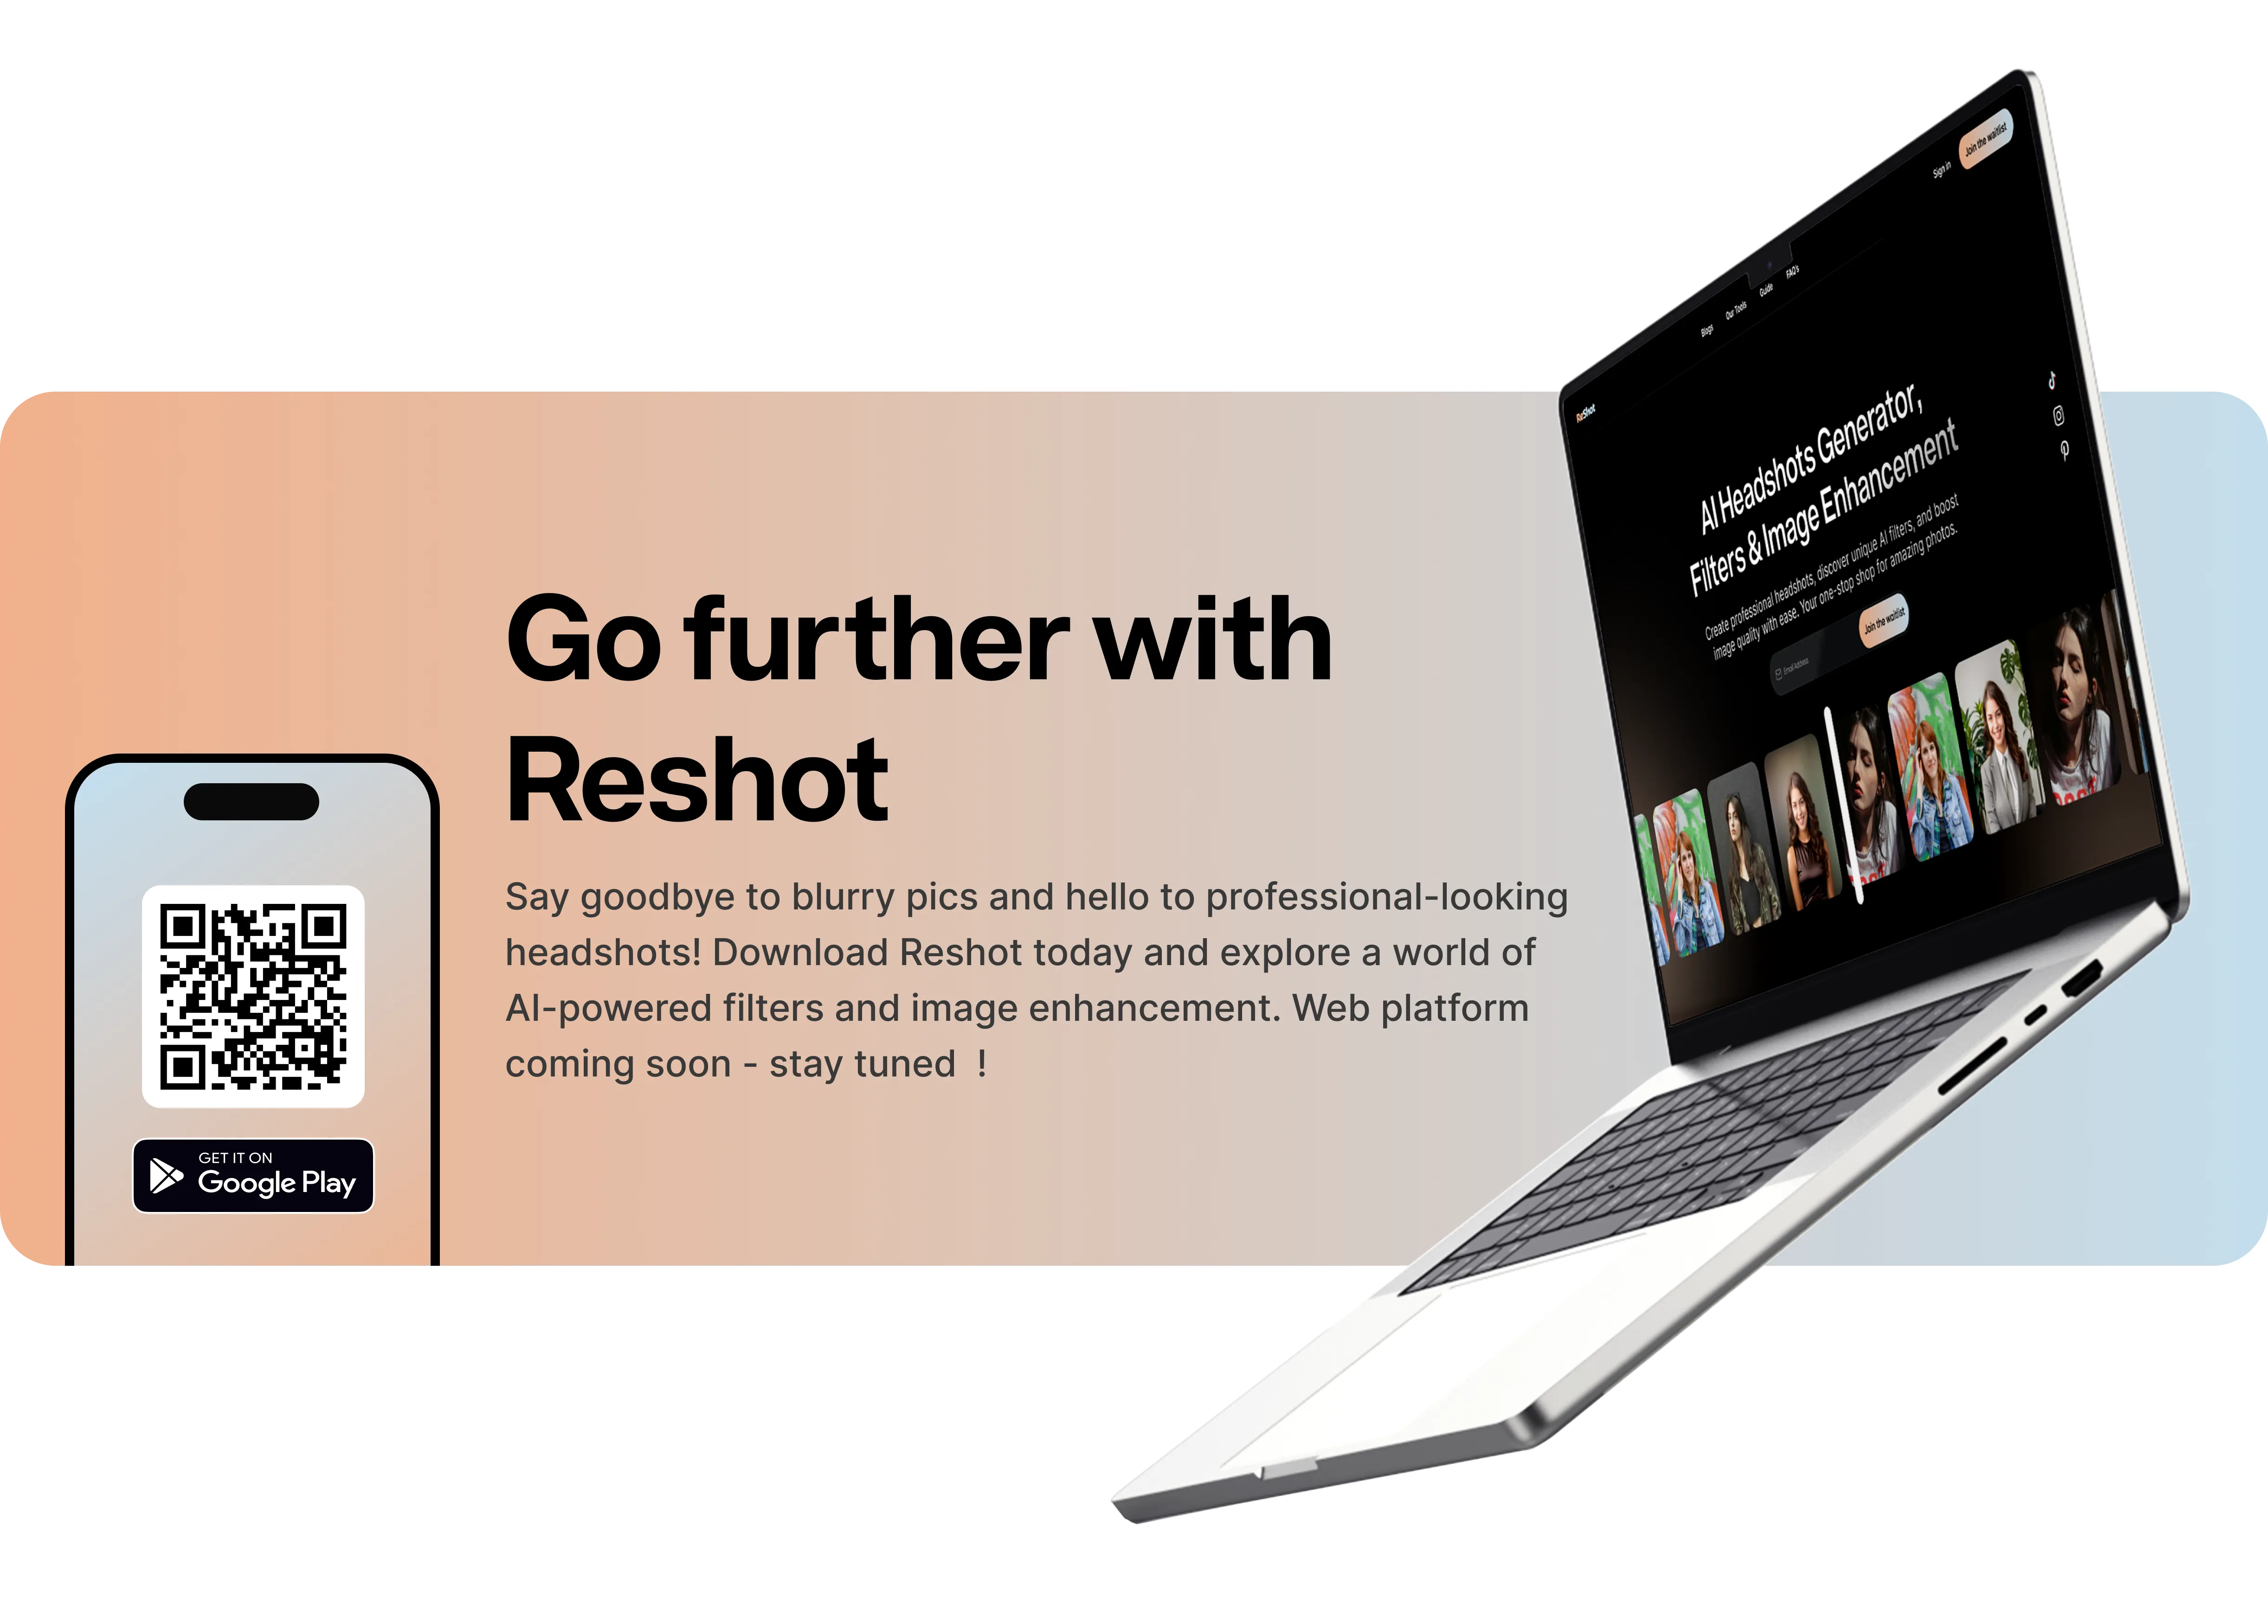 Go further with Reshot. Say goodbye to blurry pics and hello to professional-looking headshots! Download Reshot today and explore a world of AI-powered filters and image enhancement. Web platform coming soon - stay tuned!